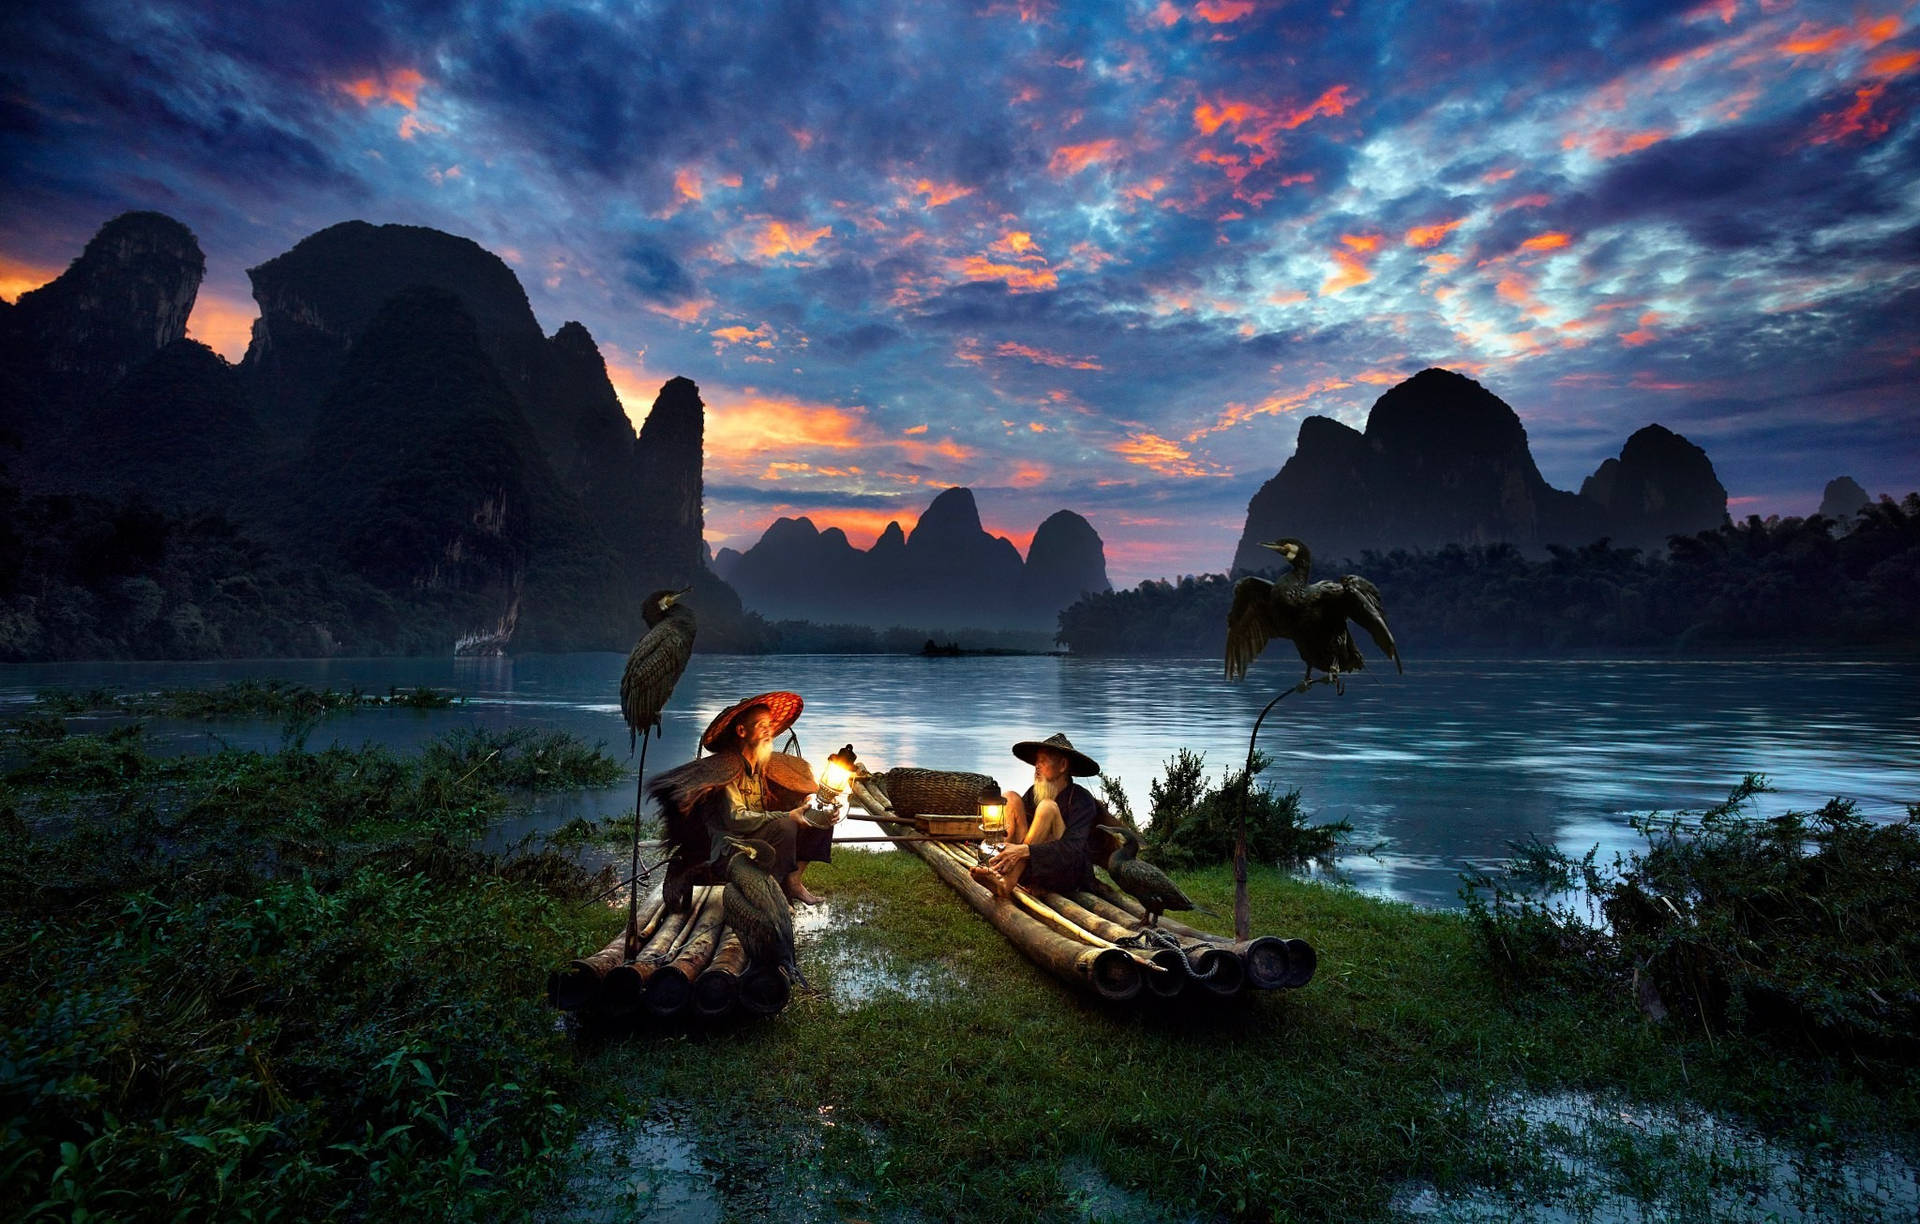 Two People On Boats With Birds In Nature Background